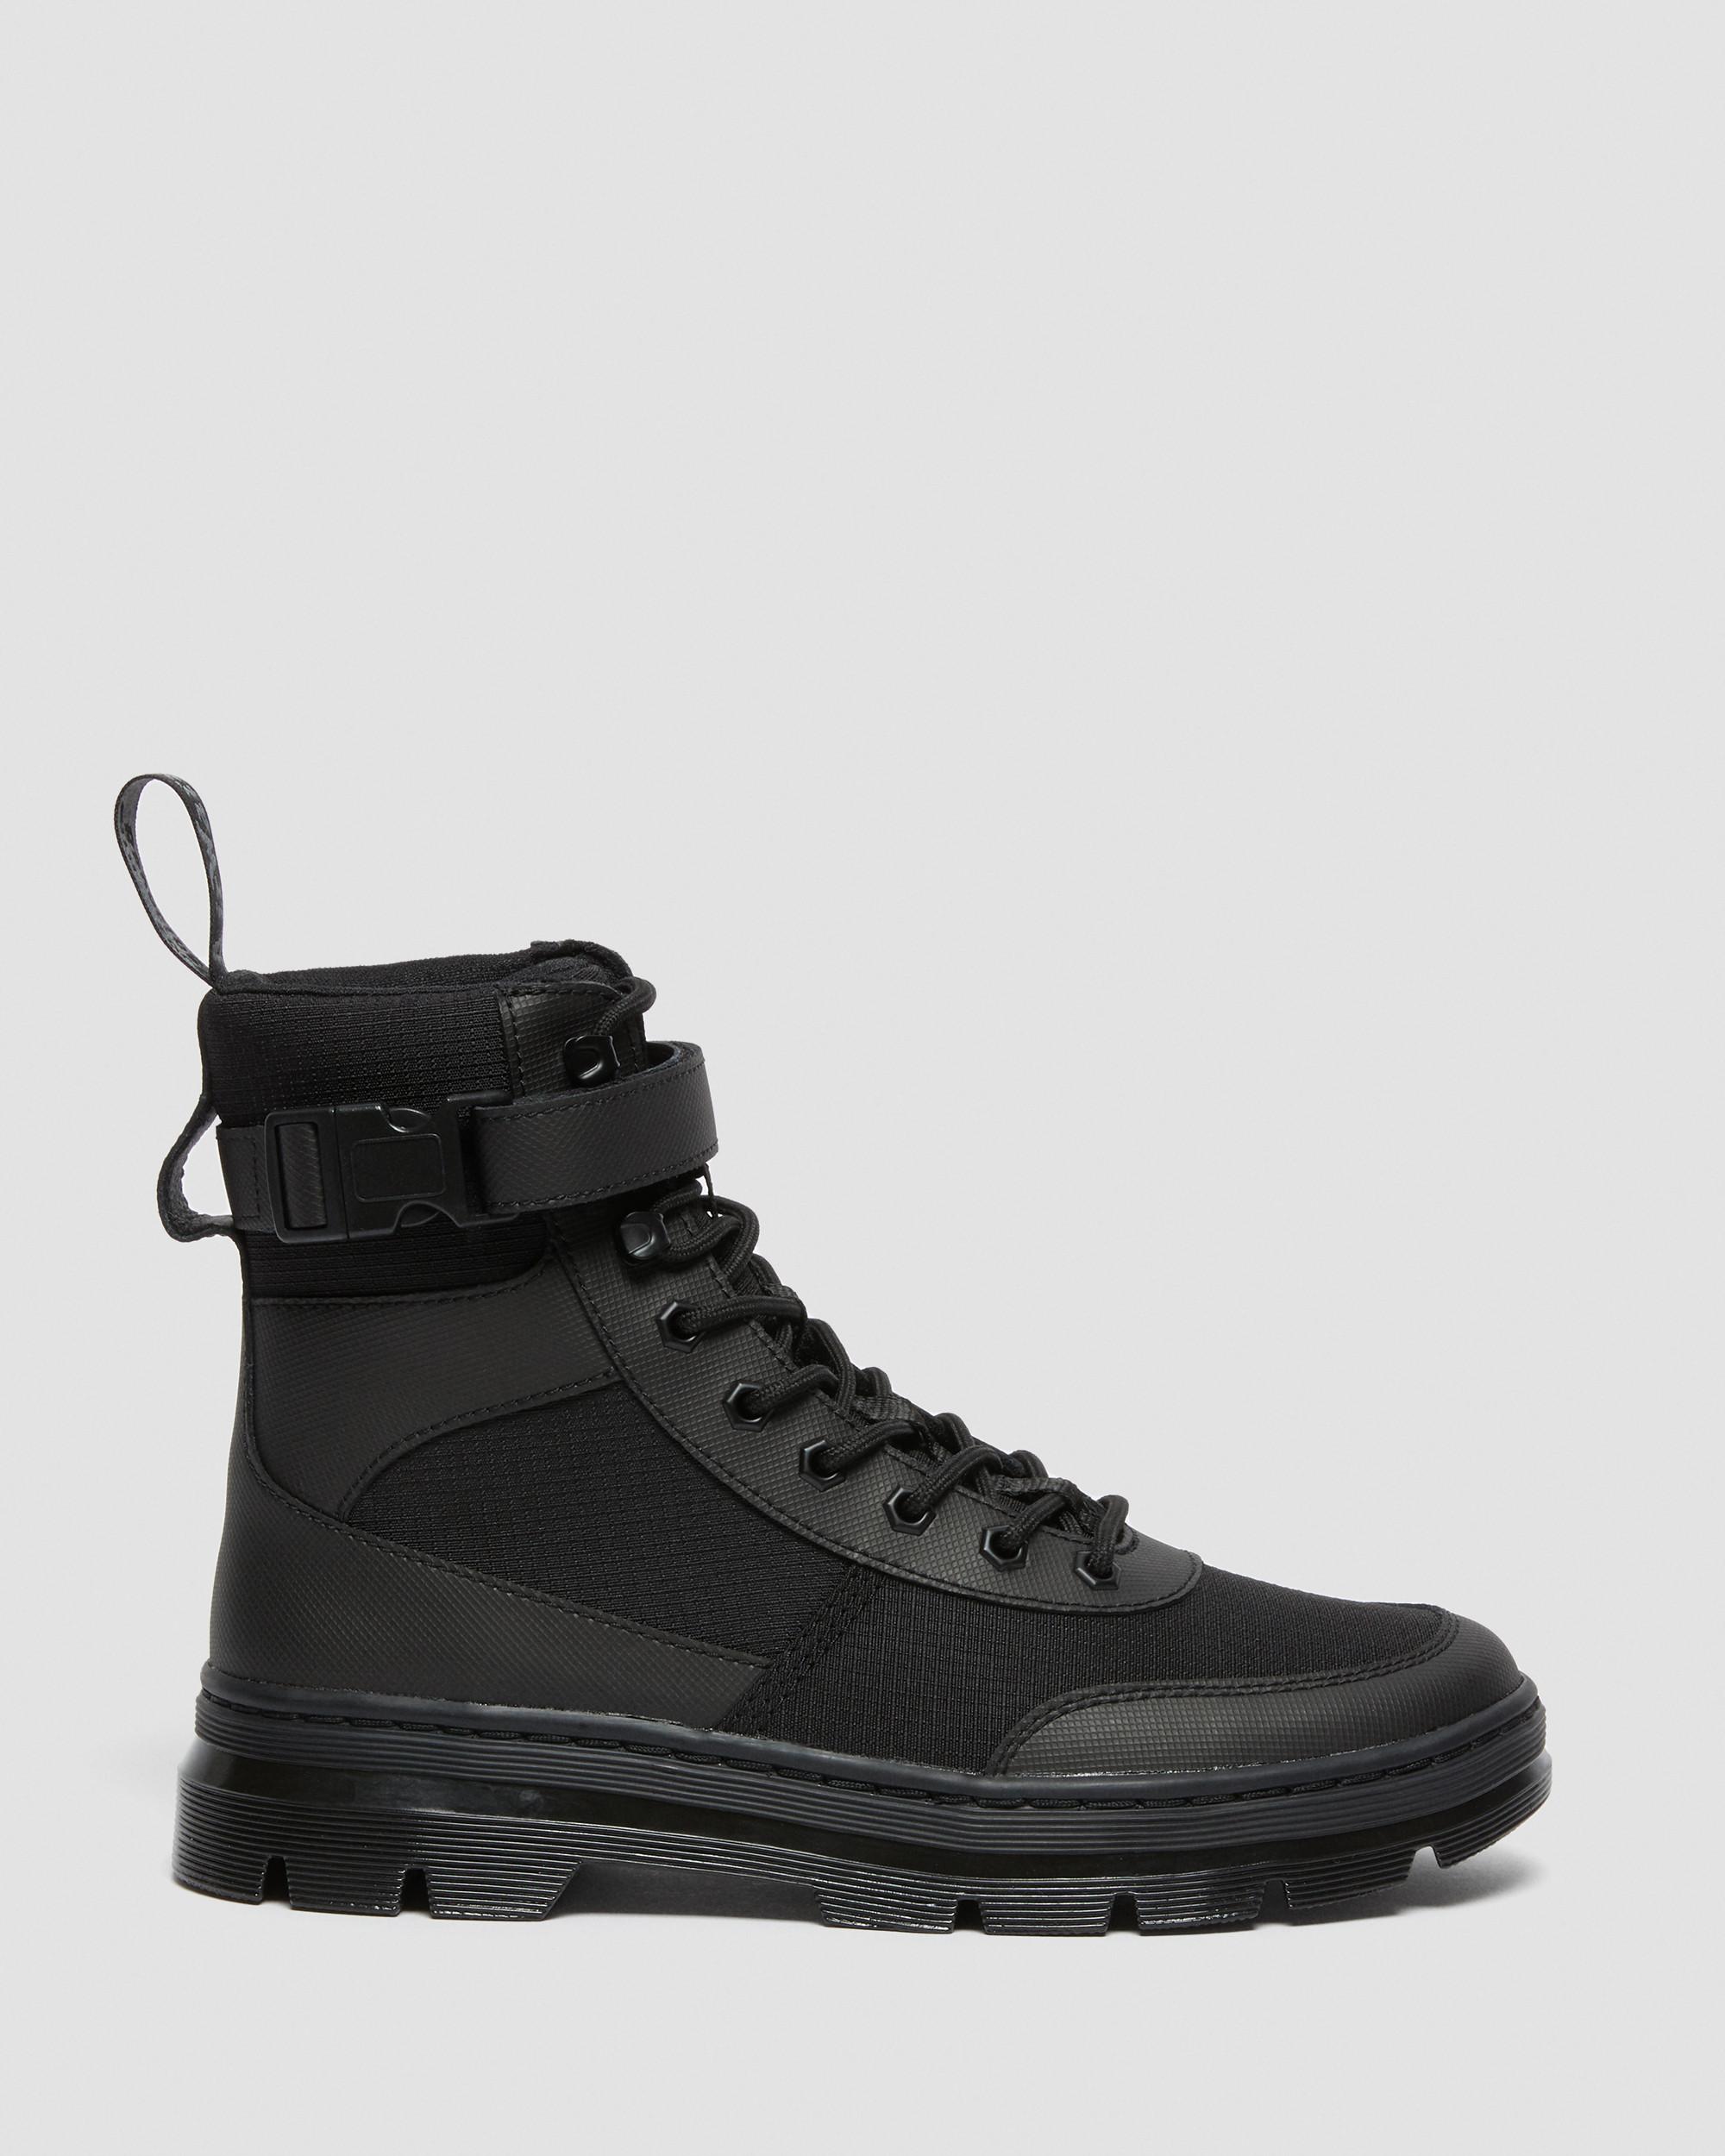 Combs Tech Poly Utility BootsCombs Tech Poly Utility Boots Dr. Martens